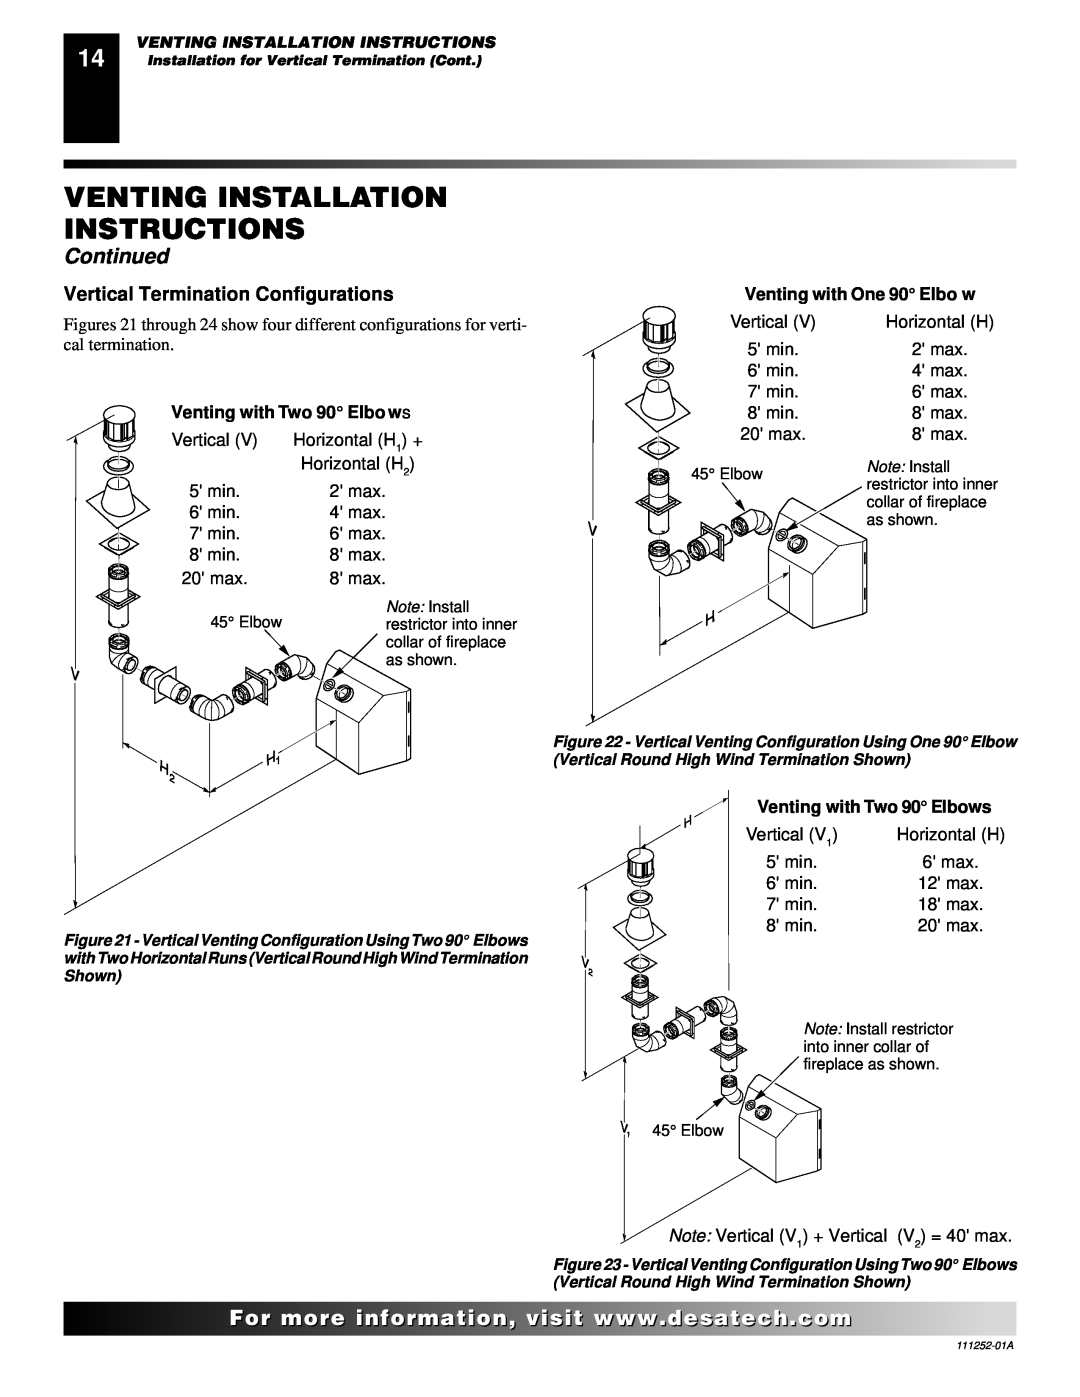 Desa CHDV36NRA installation manual Vertical Termination Configurations, Venting Installation Instructions, Continued 